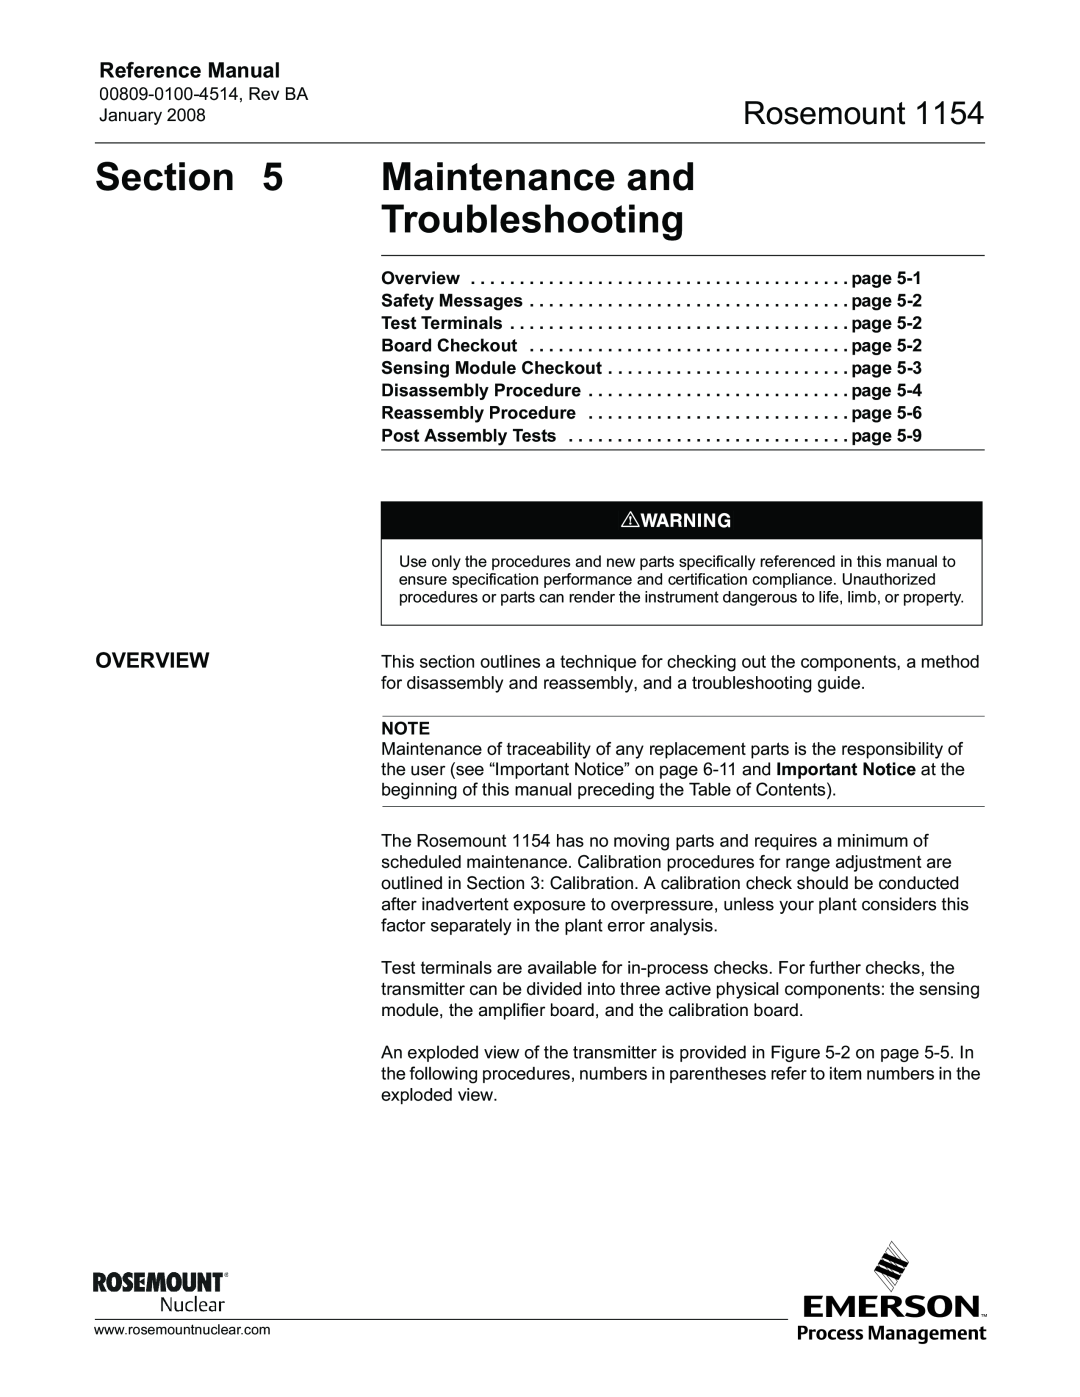 Emerson 1154, 00809-0100-4514 manual Maintenance and Troubleshooting, Overview, Rosemount, Reference Manual 